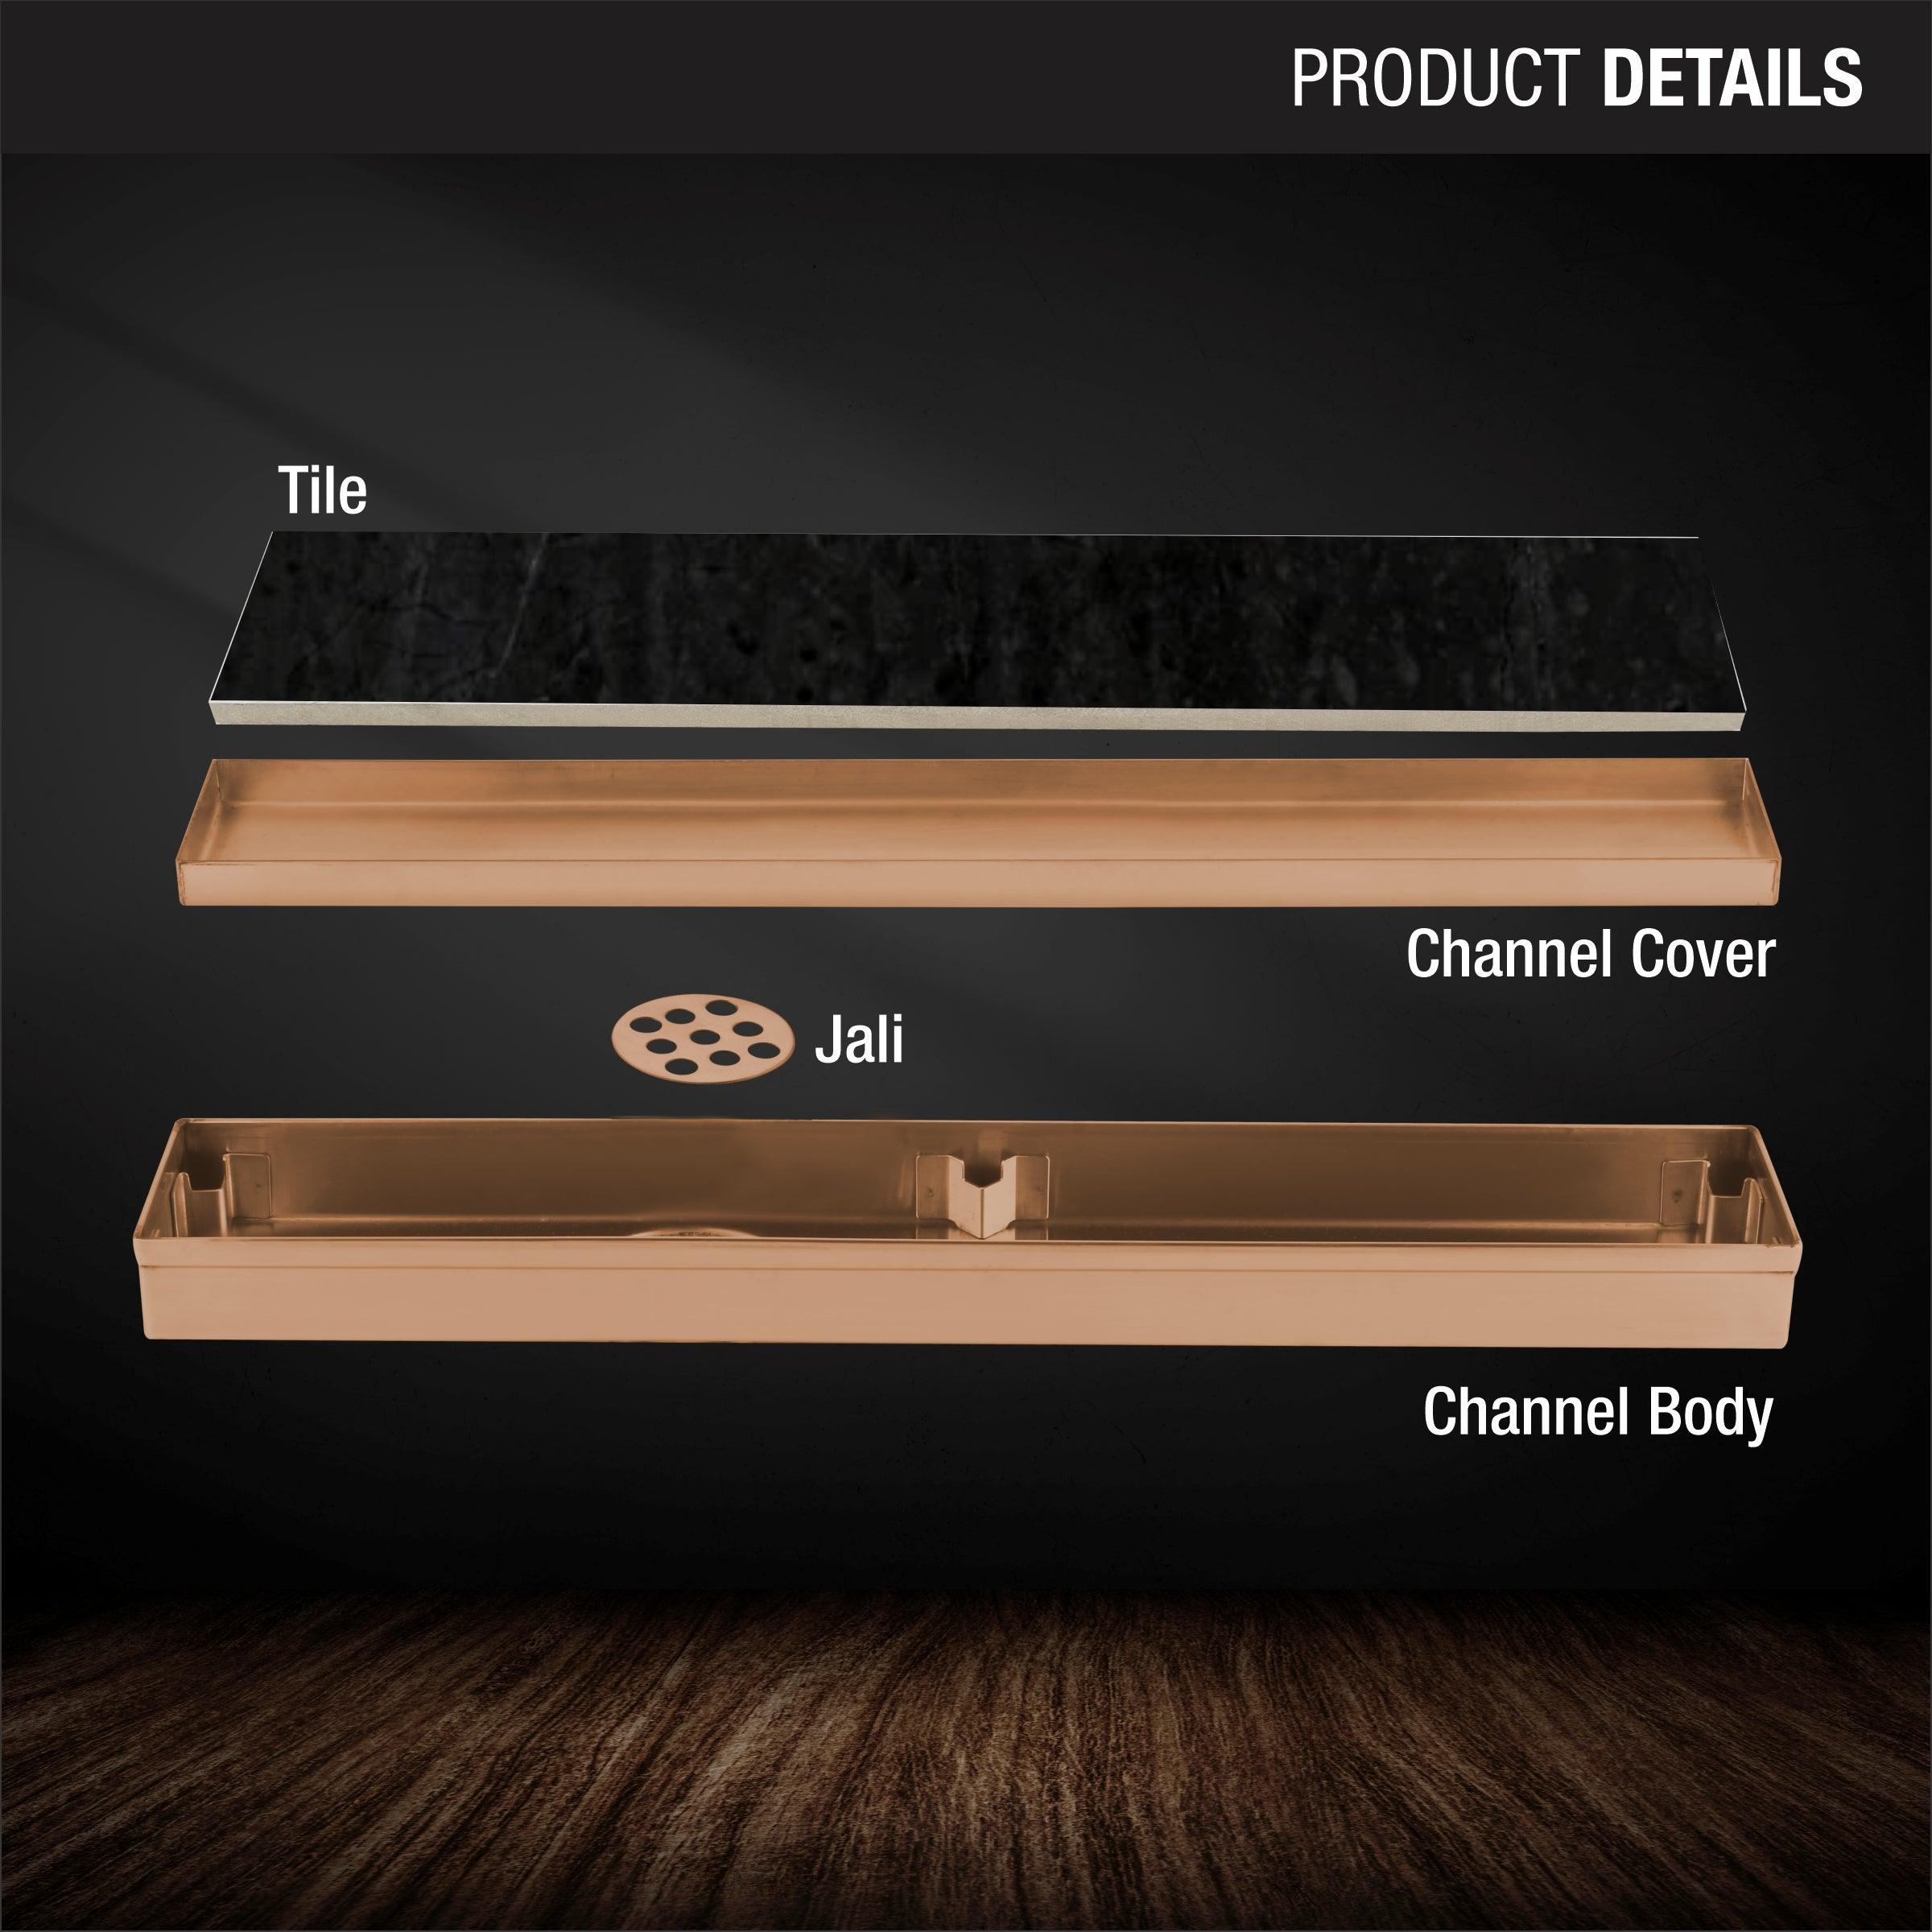 Tile Insert Shower Drain Channel - Yellow Gold (32 x 2 Inches) product details